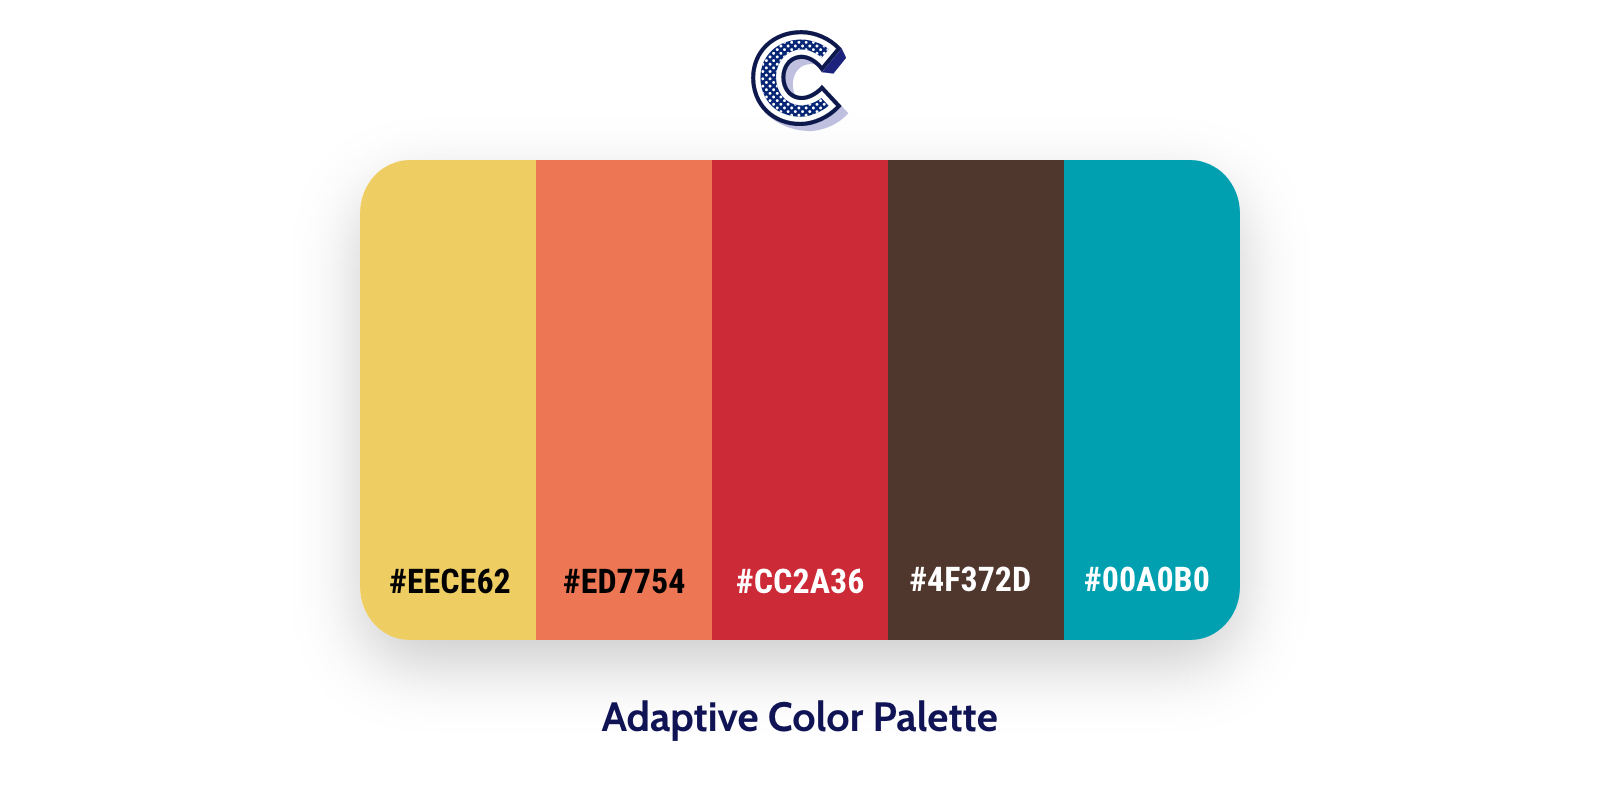 the featured image of adaptive color palette